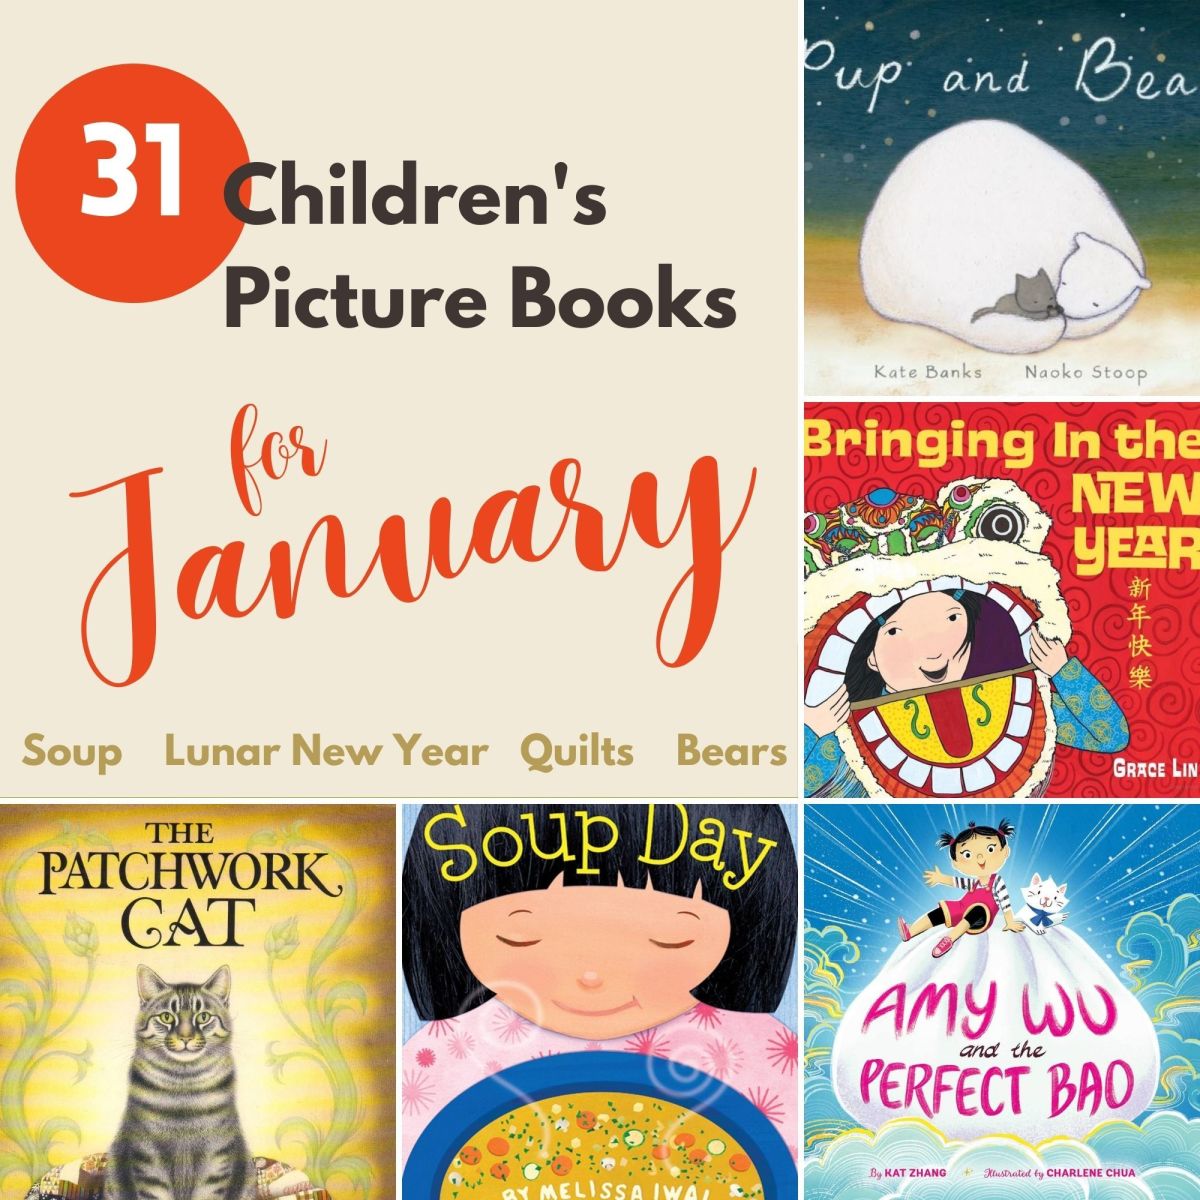 31 Children's Picture Books for January with Storytime Themes: Lunar New Year, Soup, Bears, Quilts